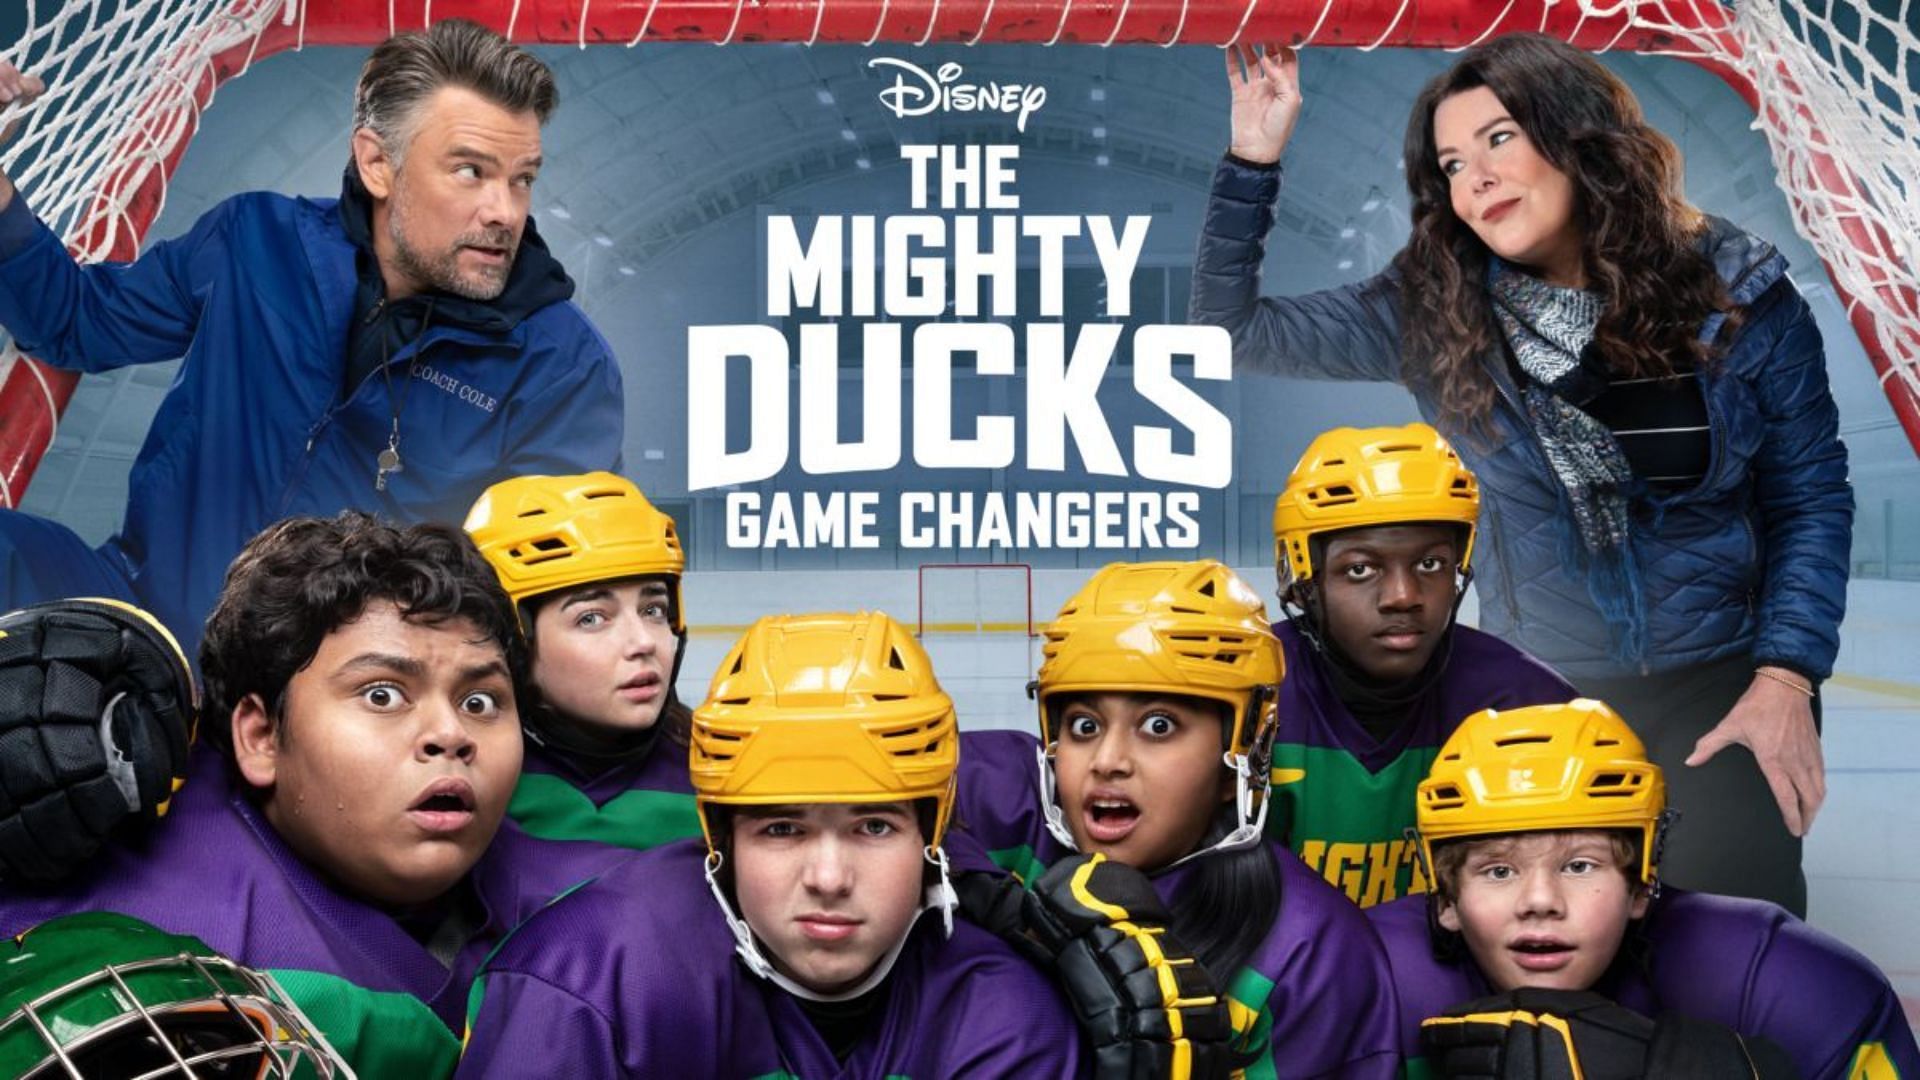 The Mighty Ducks: Game Changers Season 2 to Bring Back Original